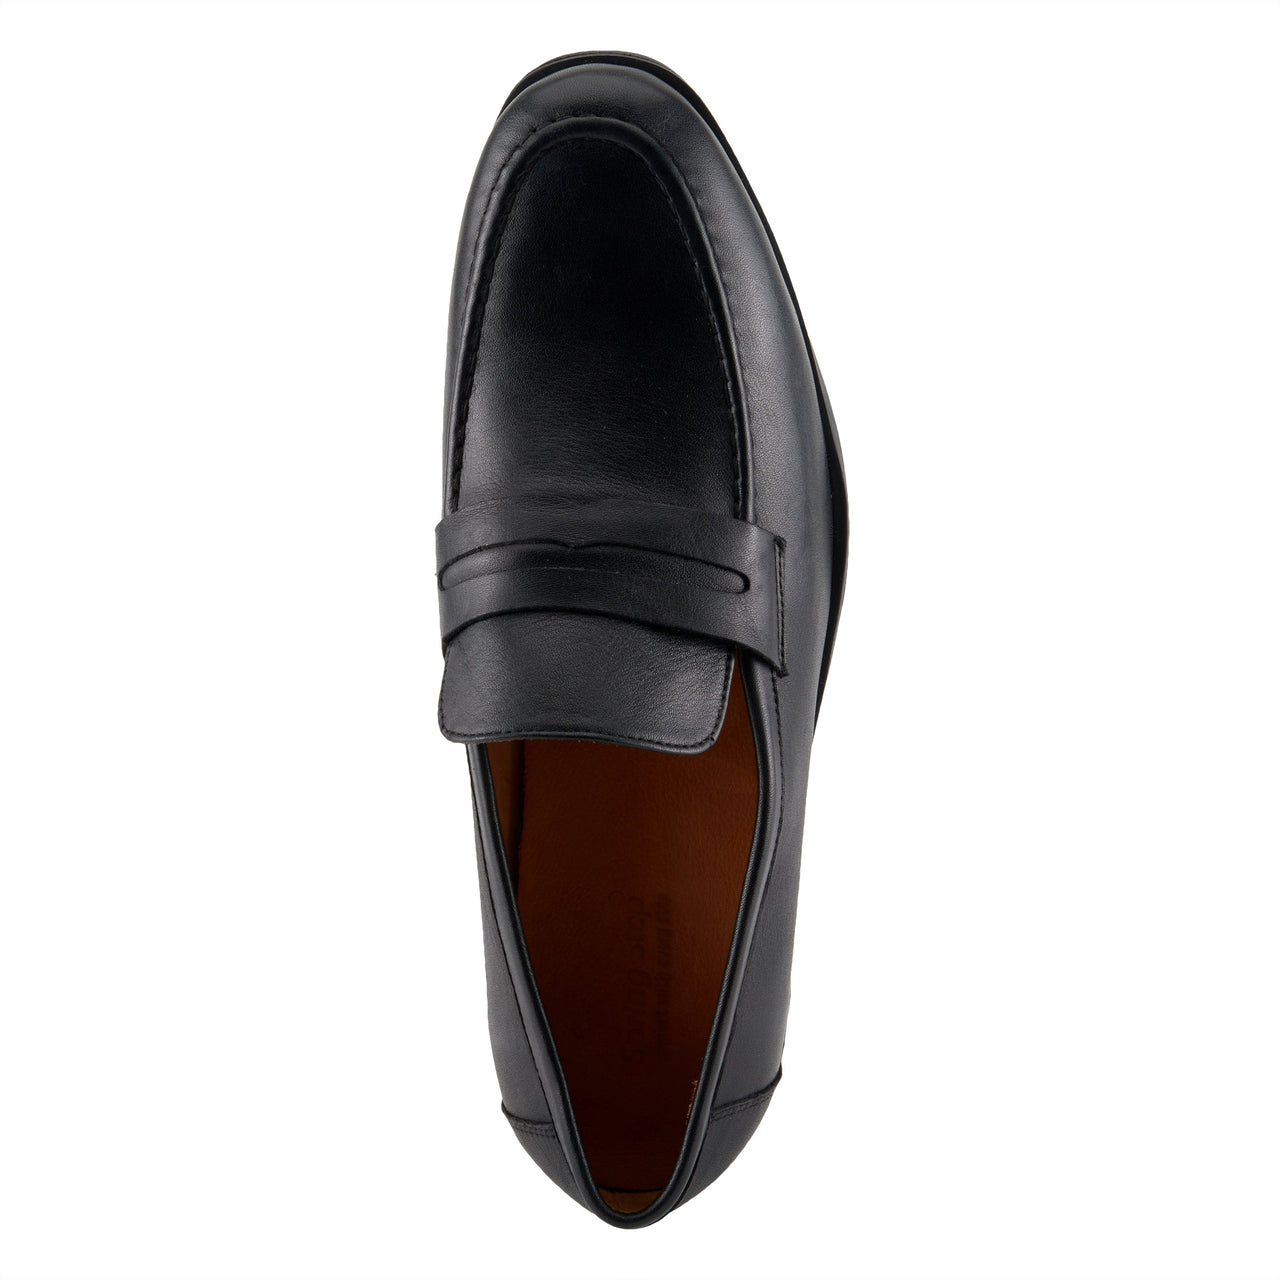 
Spring Step Men Paul Shoes comfortable and supportive for all-day wear